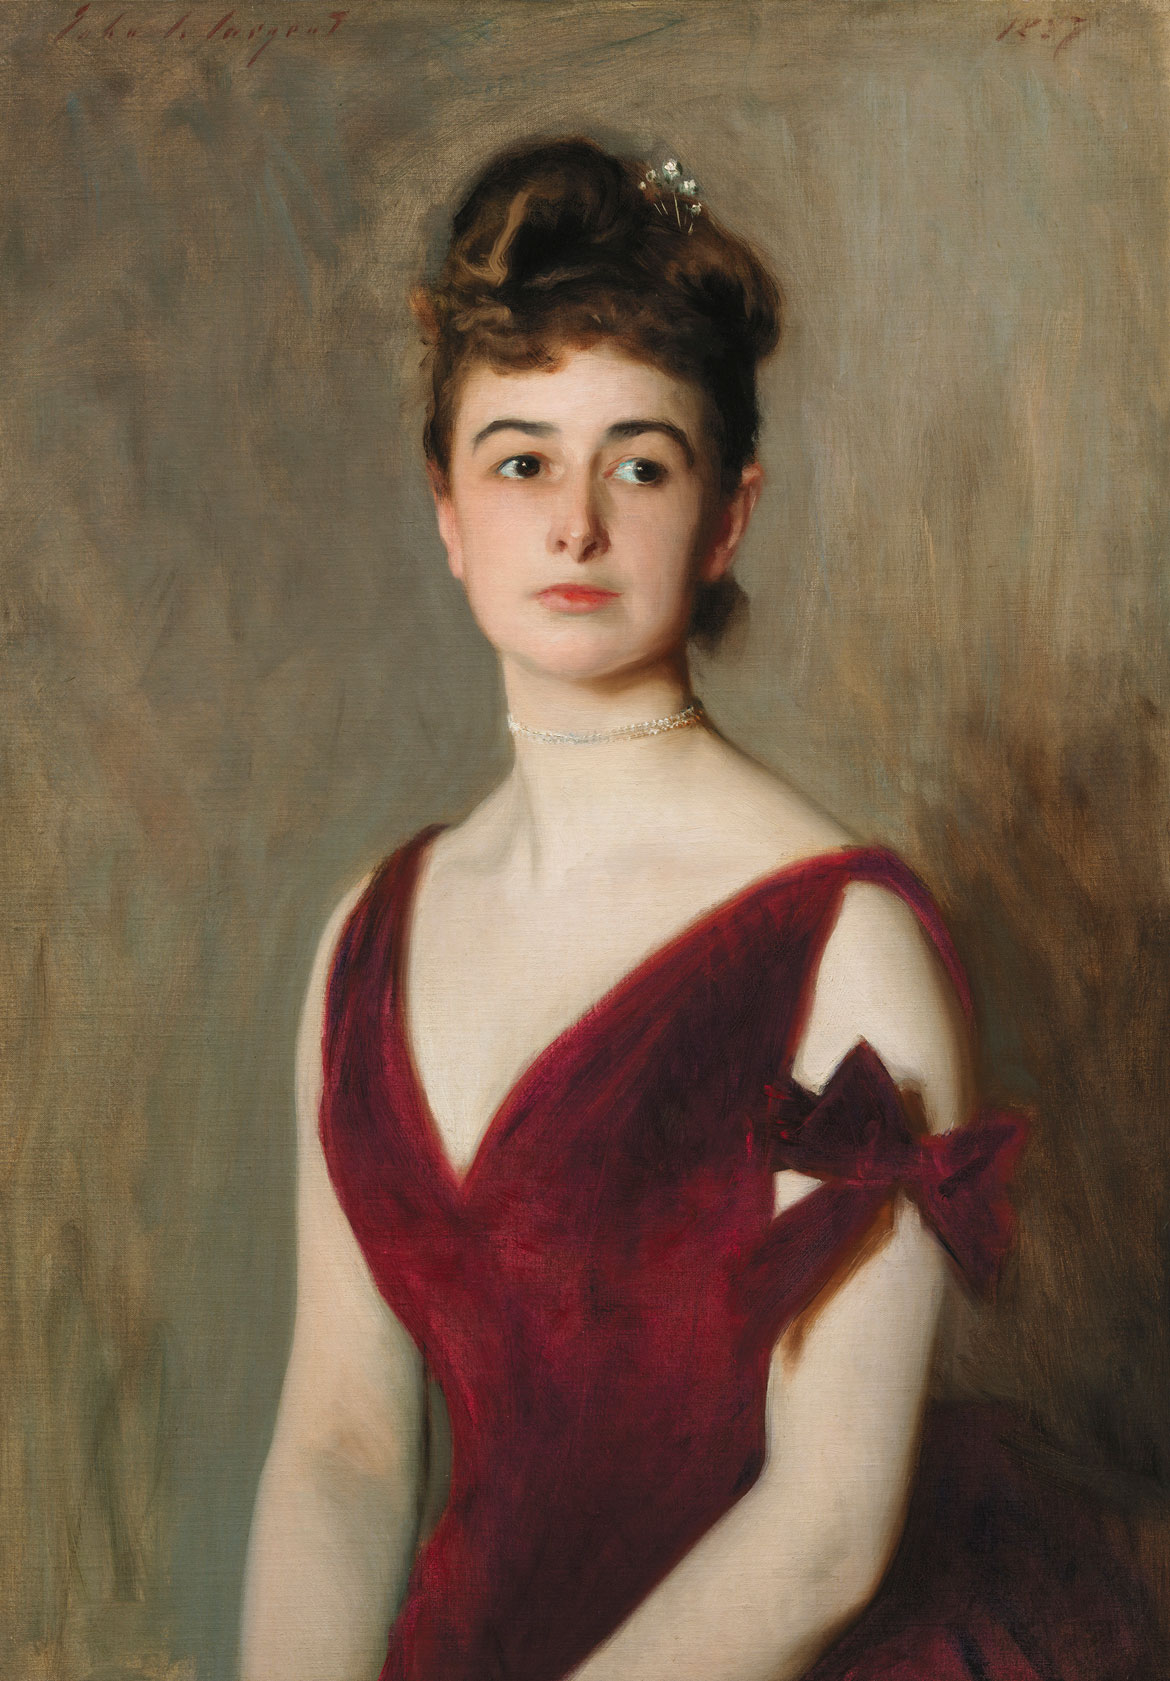 John Singer Sargent, "Mrs. Charles E. Inches (Louise Pomeroy)," 1887, oil on canvas.